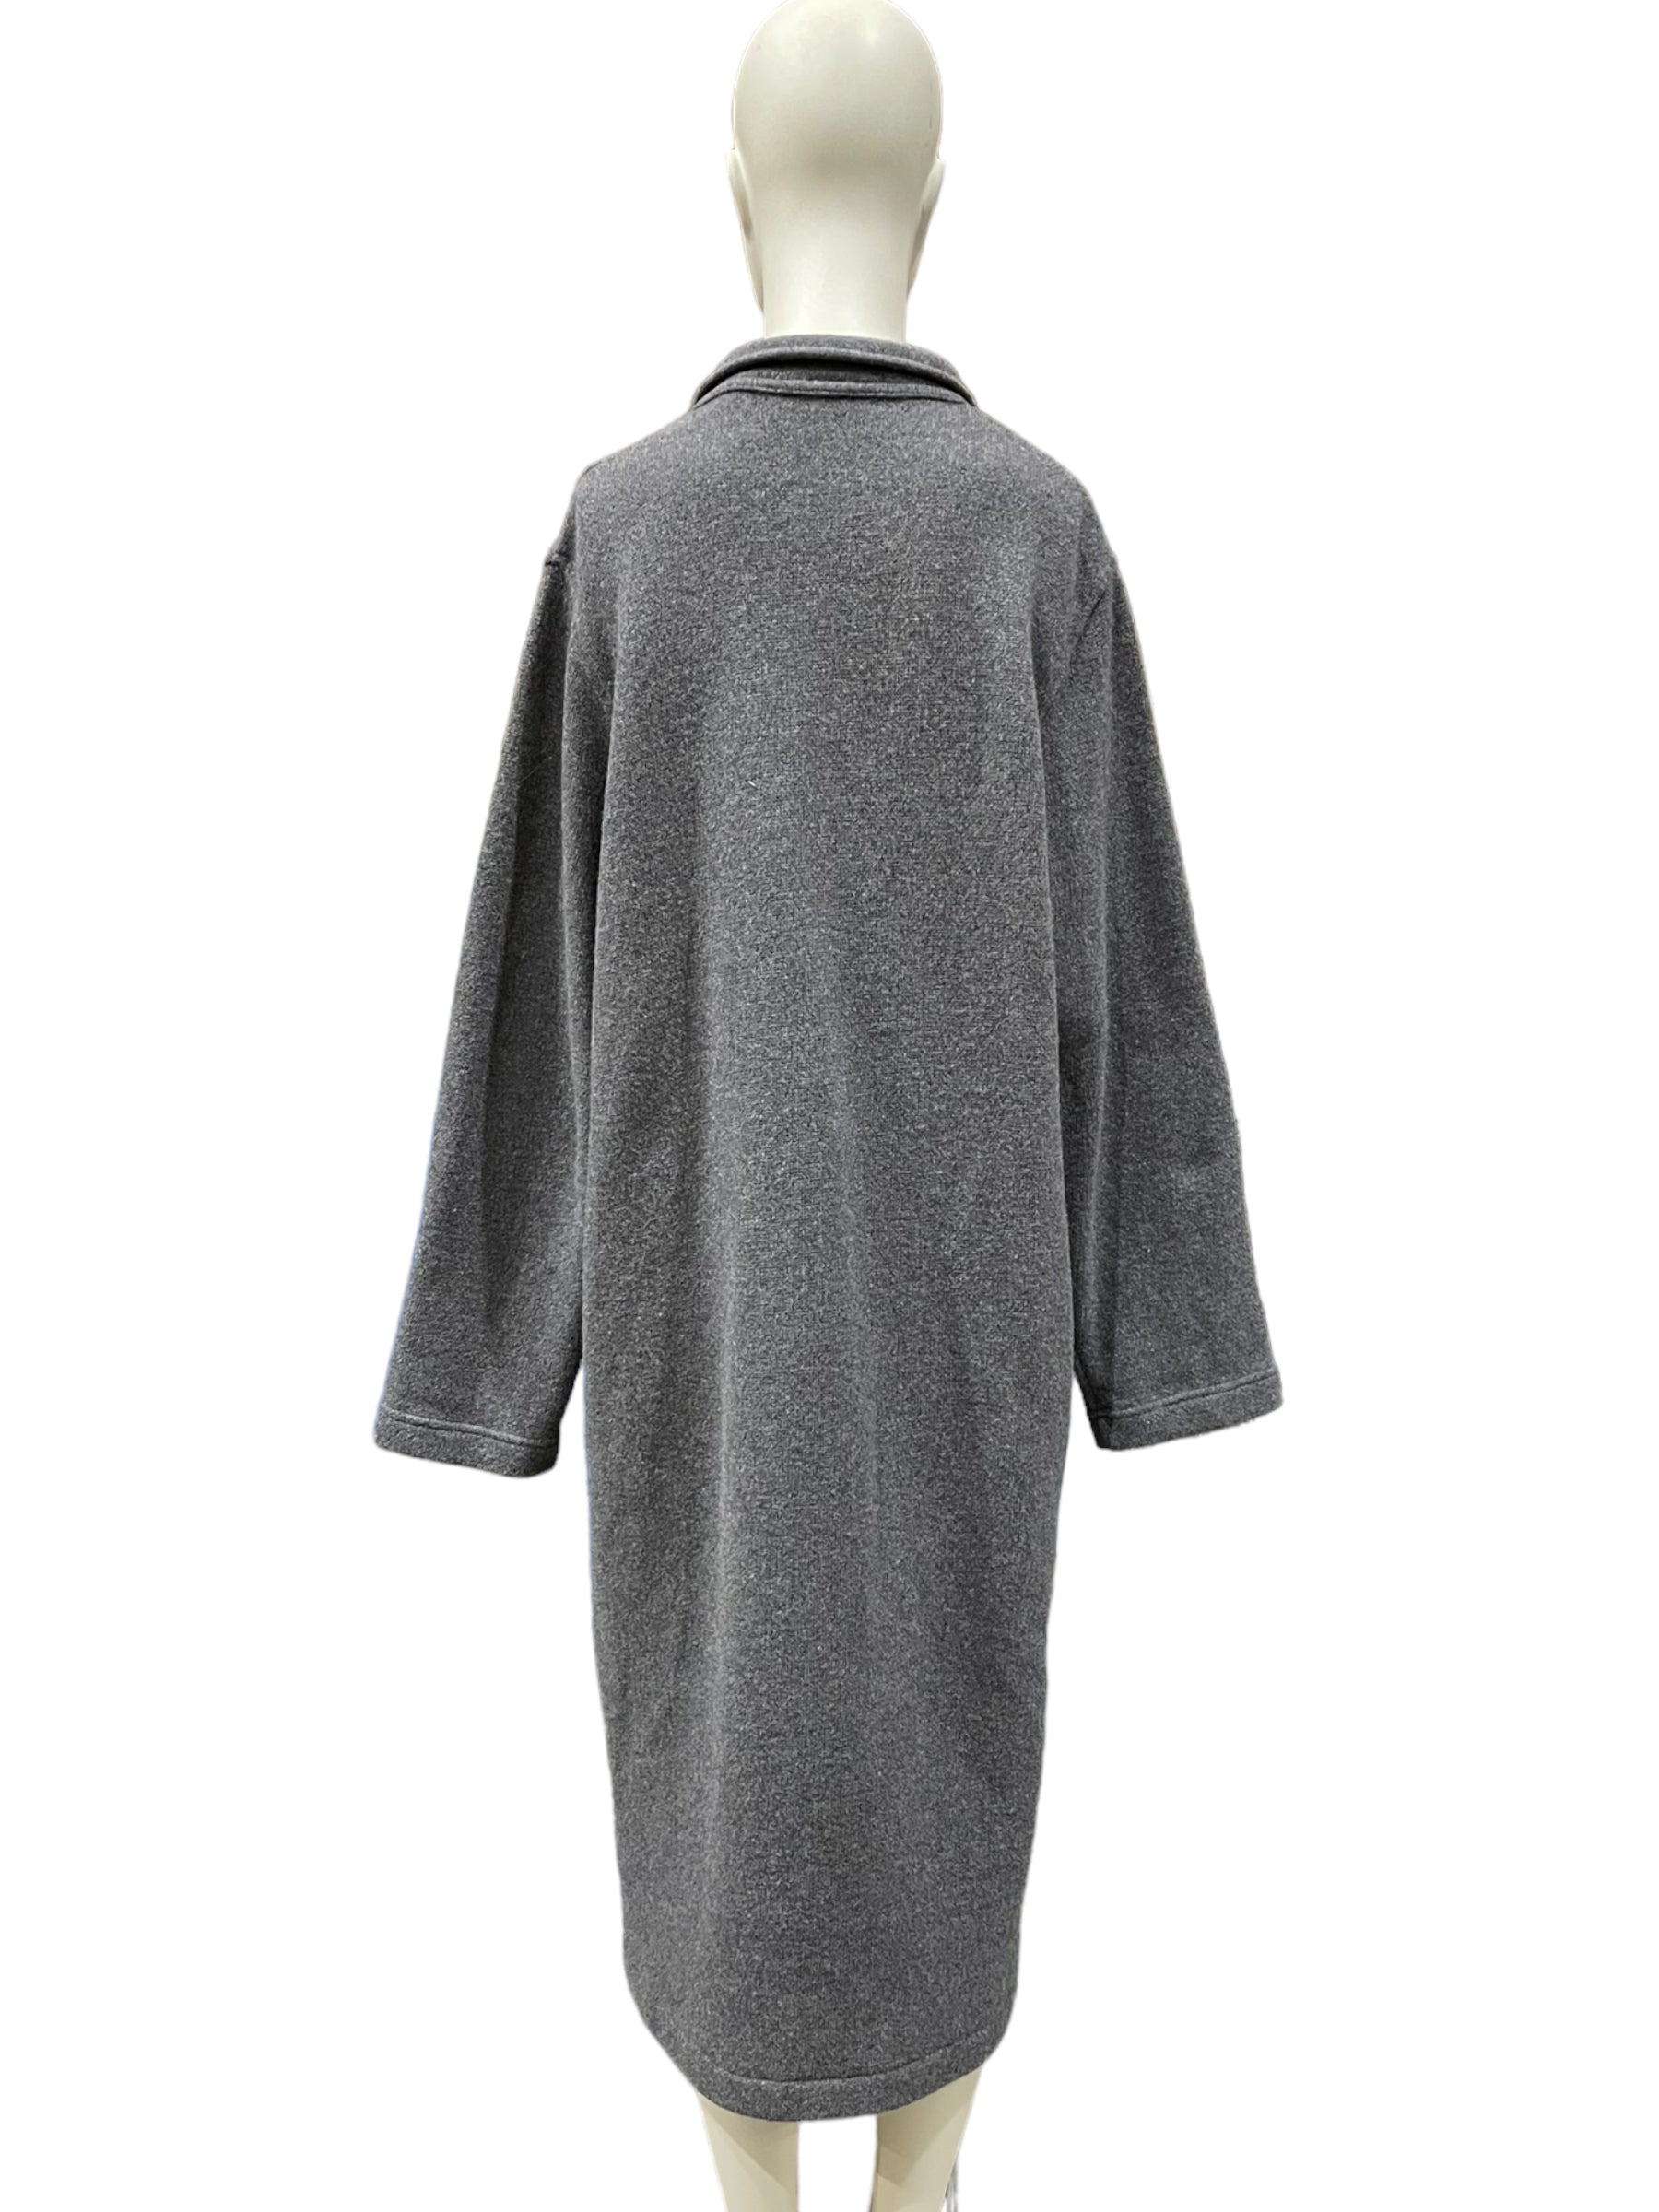 Morgano Made in Italy Grey Wool Long Coat - Size Large